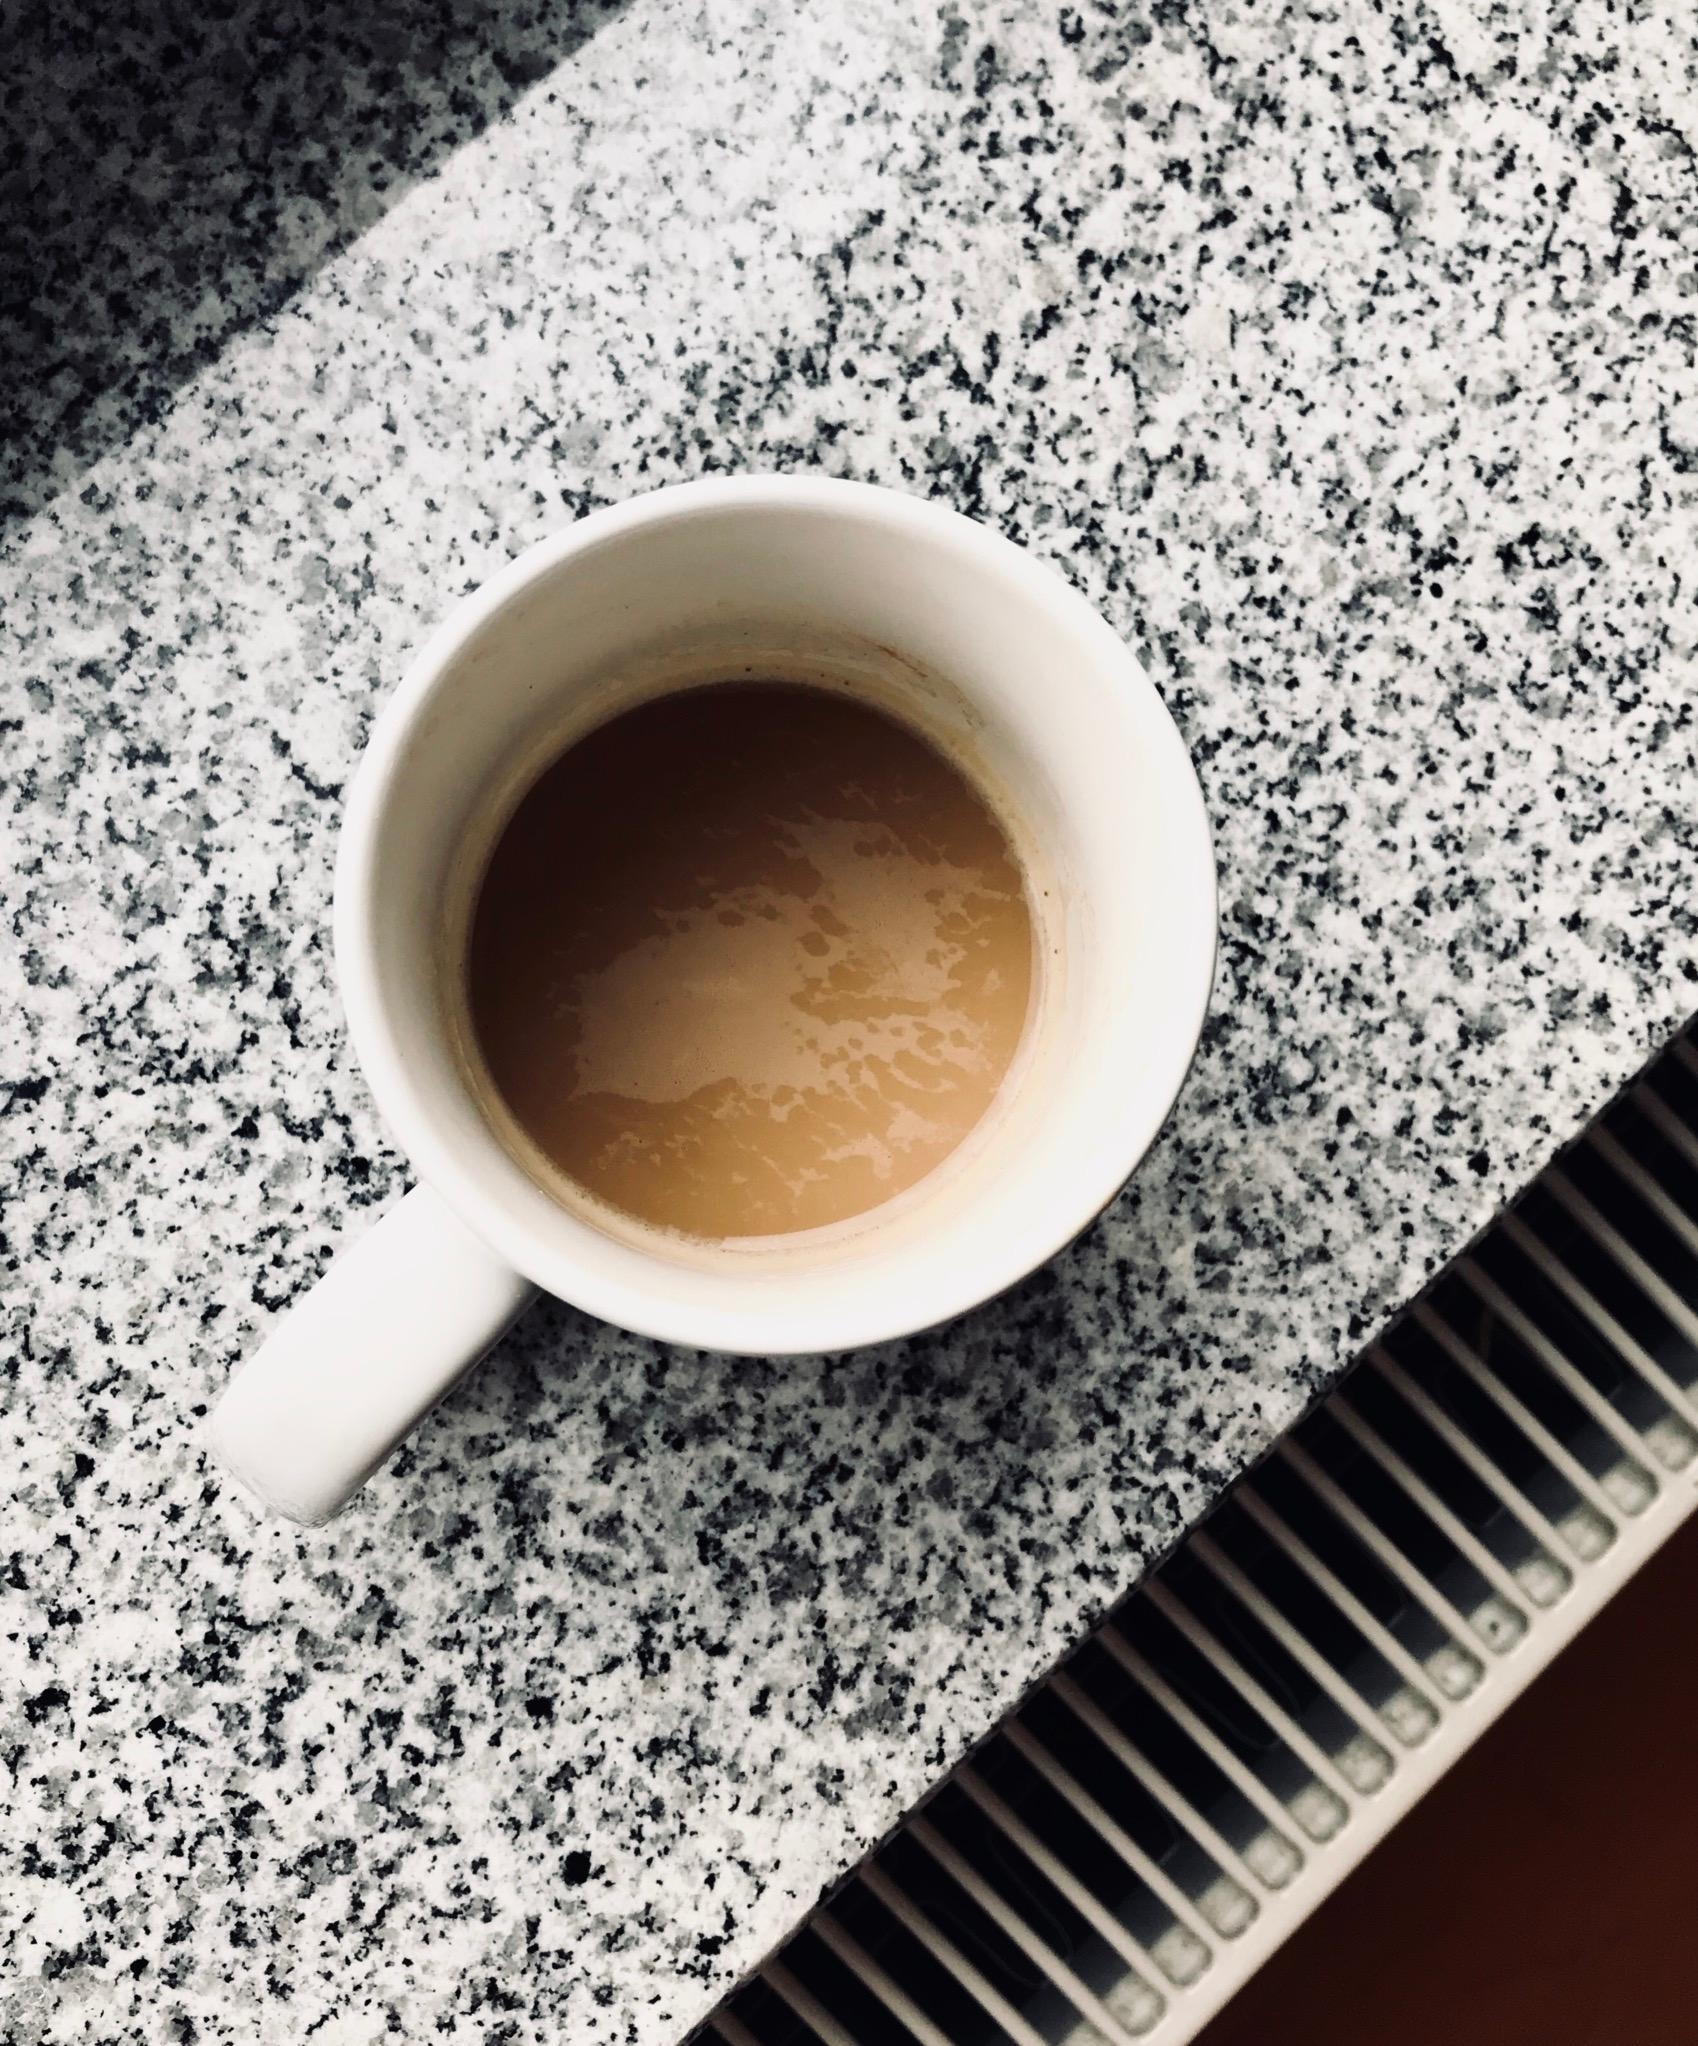 Have a break, have a coffee! 🖤
#kaffee #coffeelover #pause #granit #fensterbank #lieblingsgetränk 